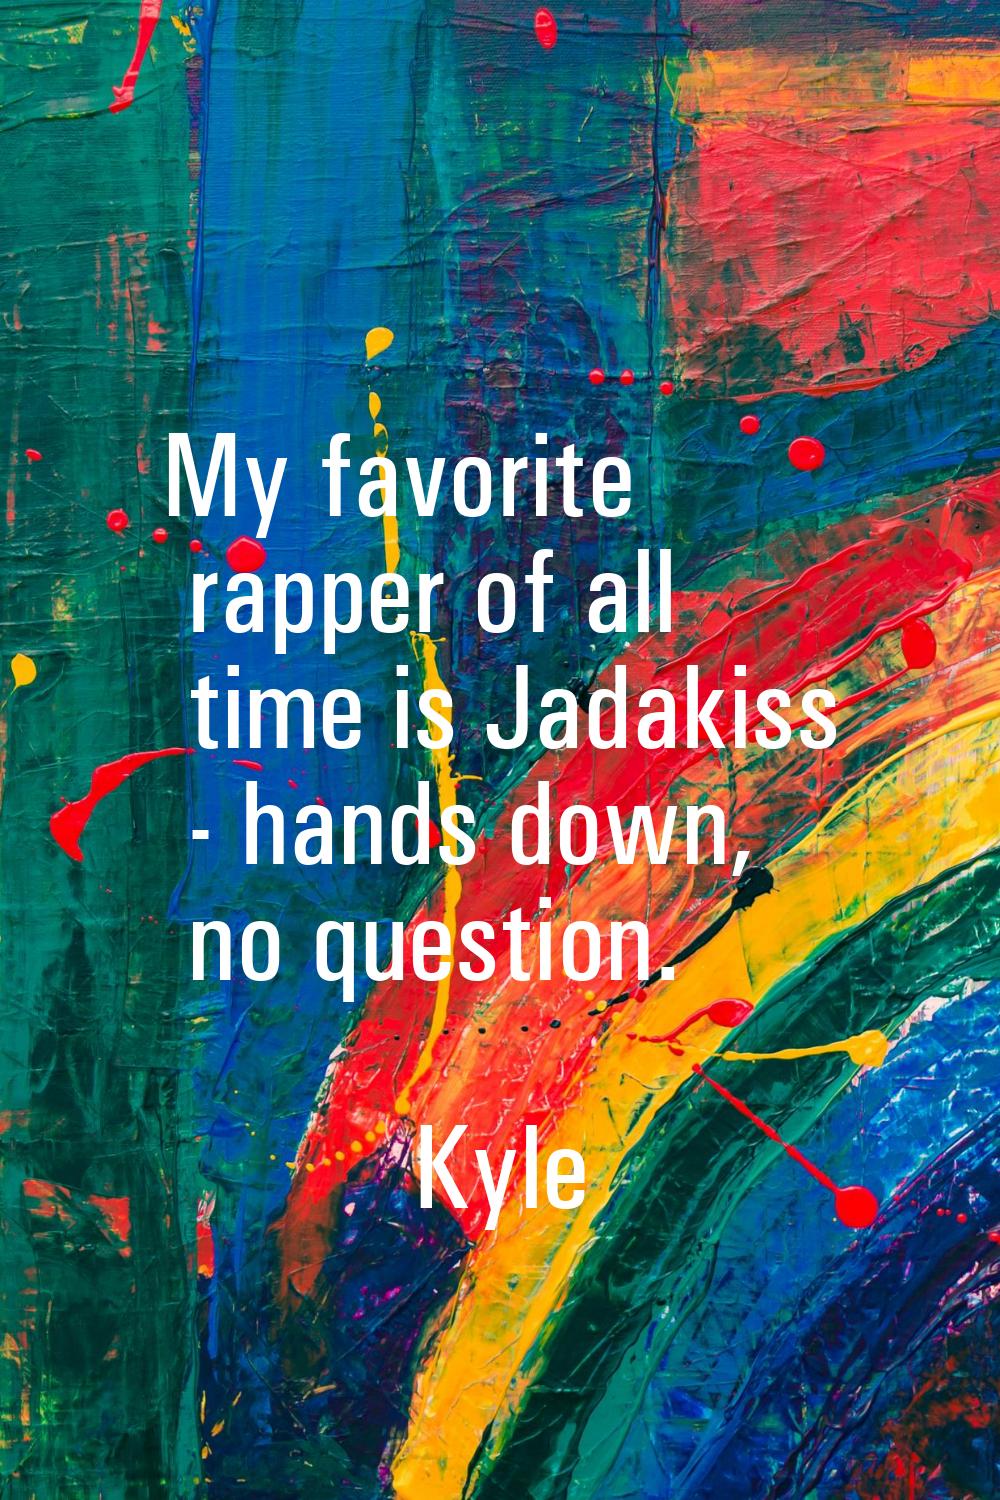 My favorite rapper of all time is Jadakiss - hands down, no question.